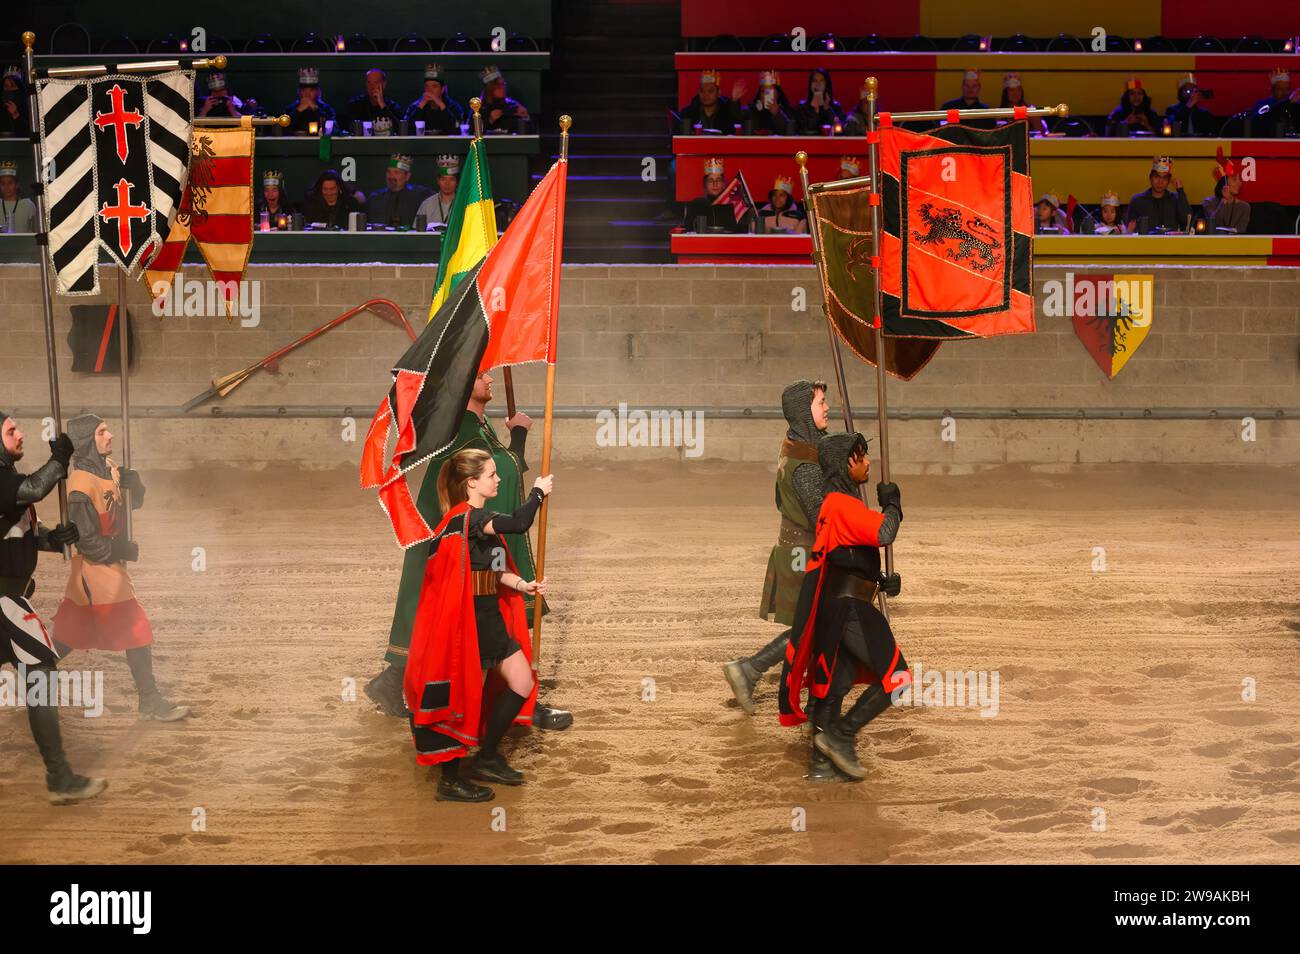 Medieval Times Dinner and Tournament, Toronto, Canada Stock Photo